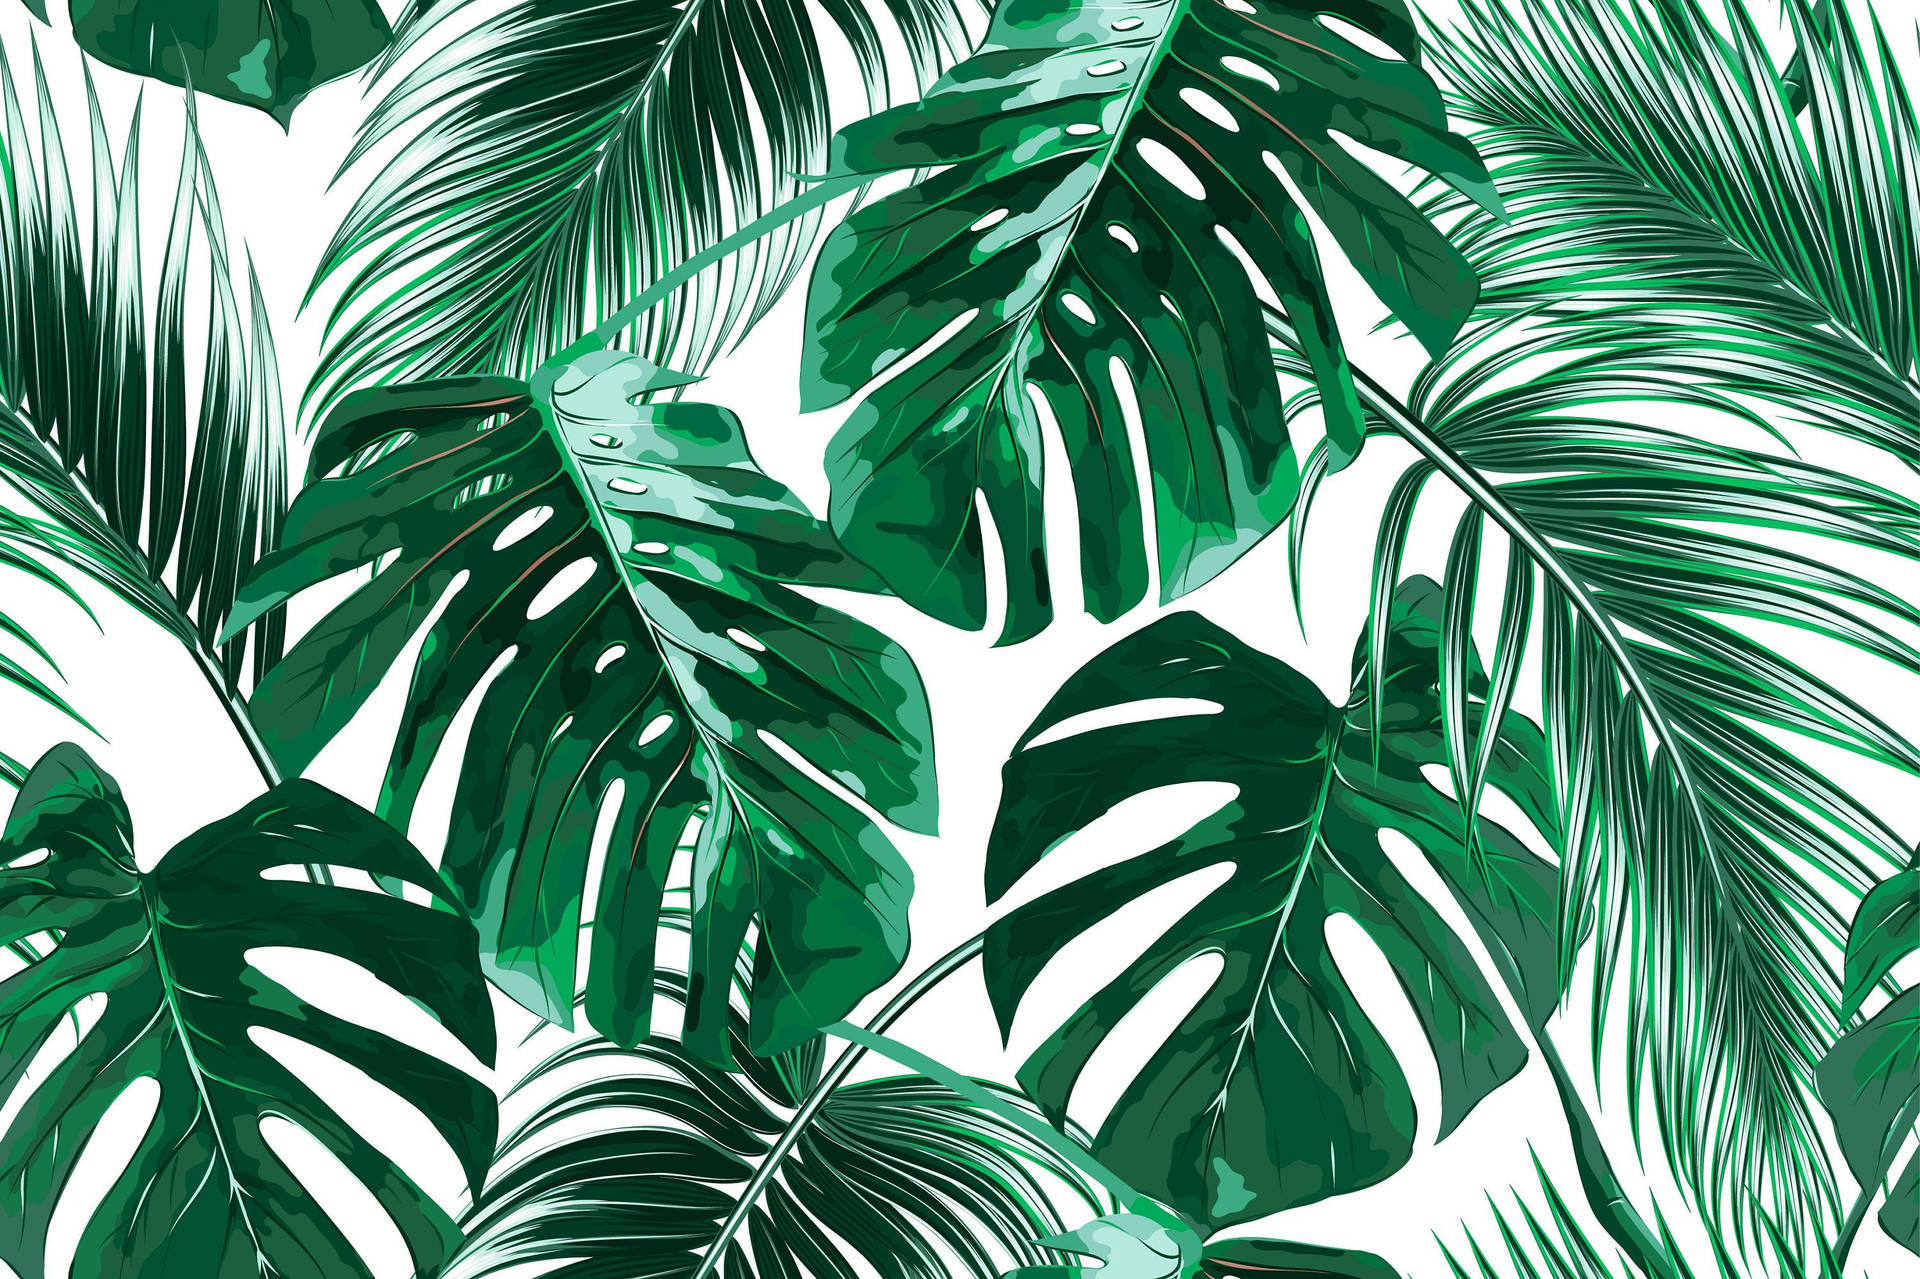 Joana Removable Tropical Palm Leaves 7.92' L X 150 W Peel And Stick Wallpaper Roll Background